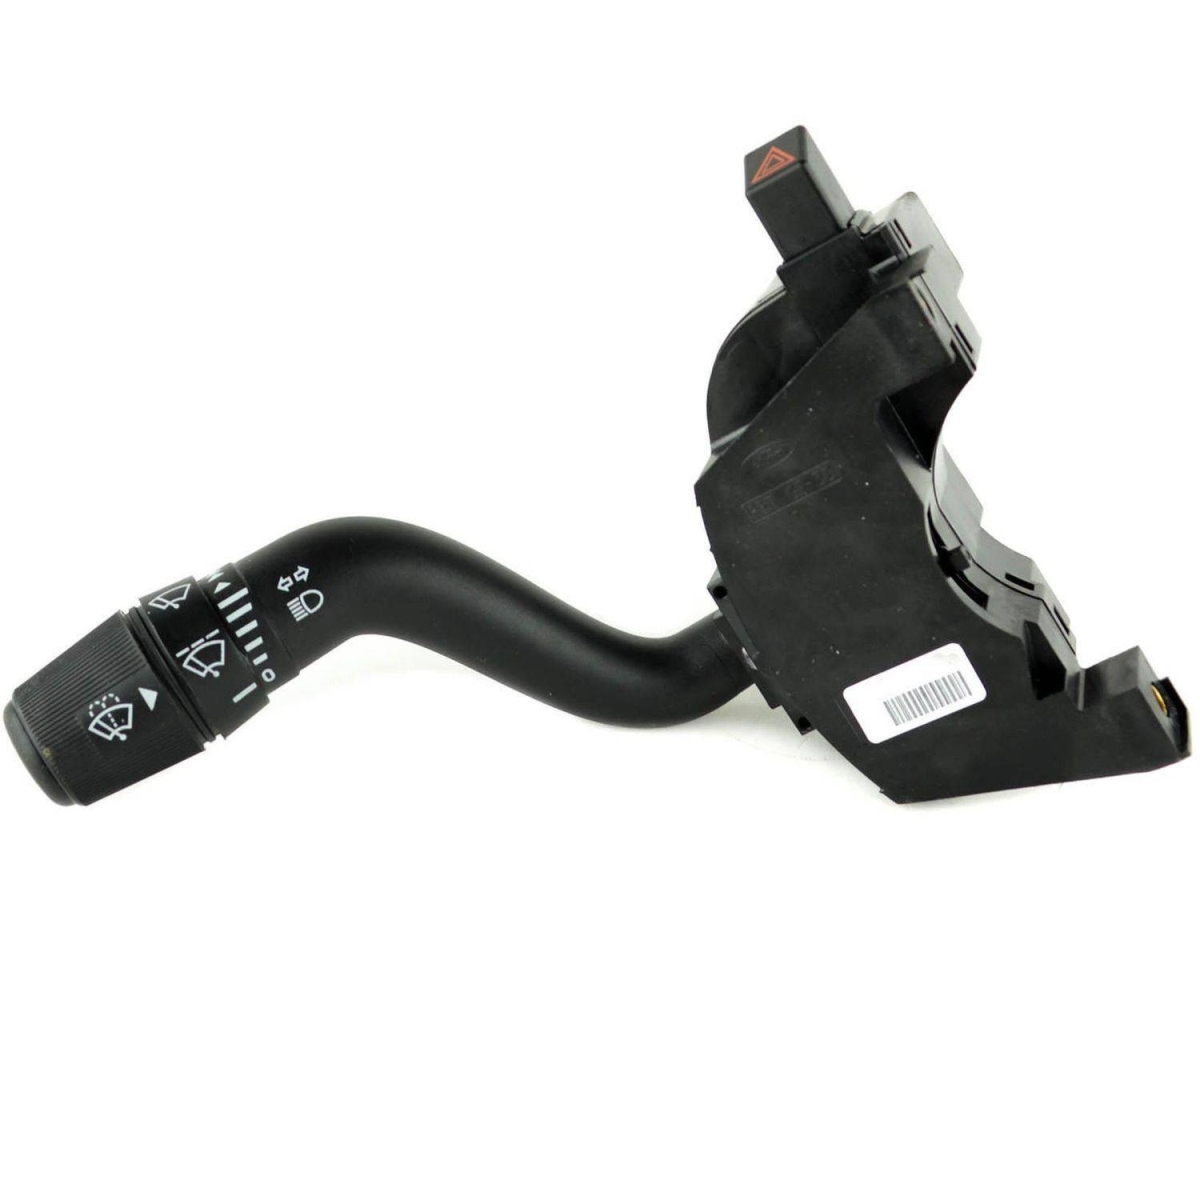 UPC 031508501225 product image for Ford SW6505 Turn Signal Switch for 2008-2013 Ford Escape | upcitemdb.com